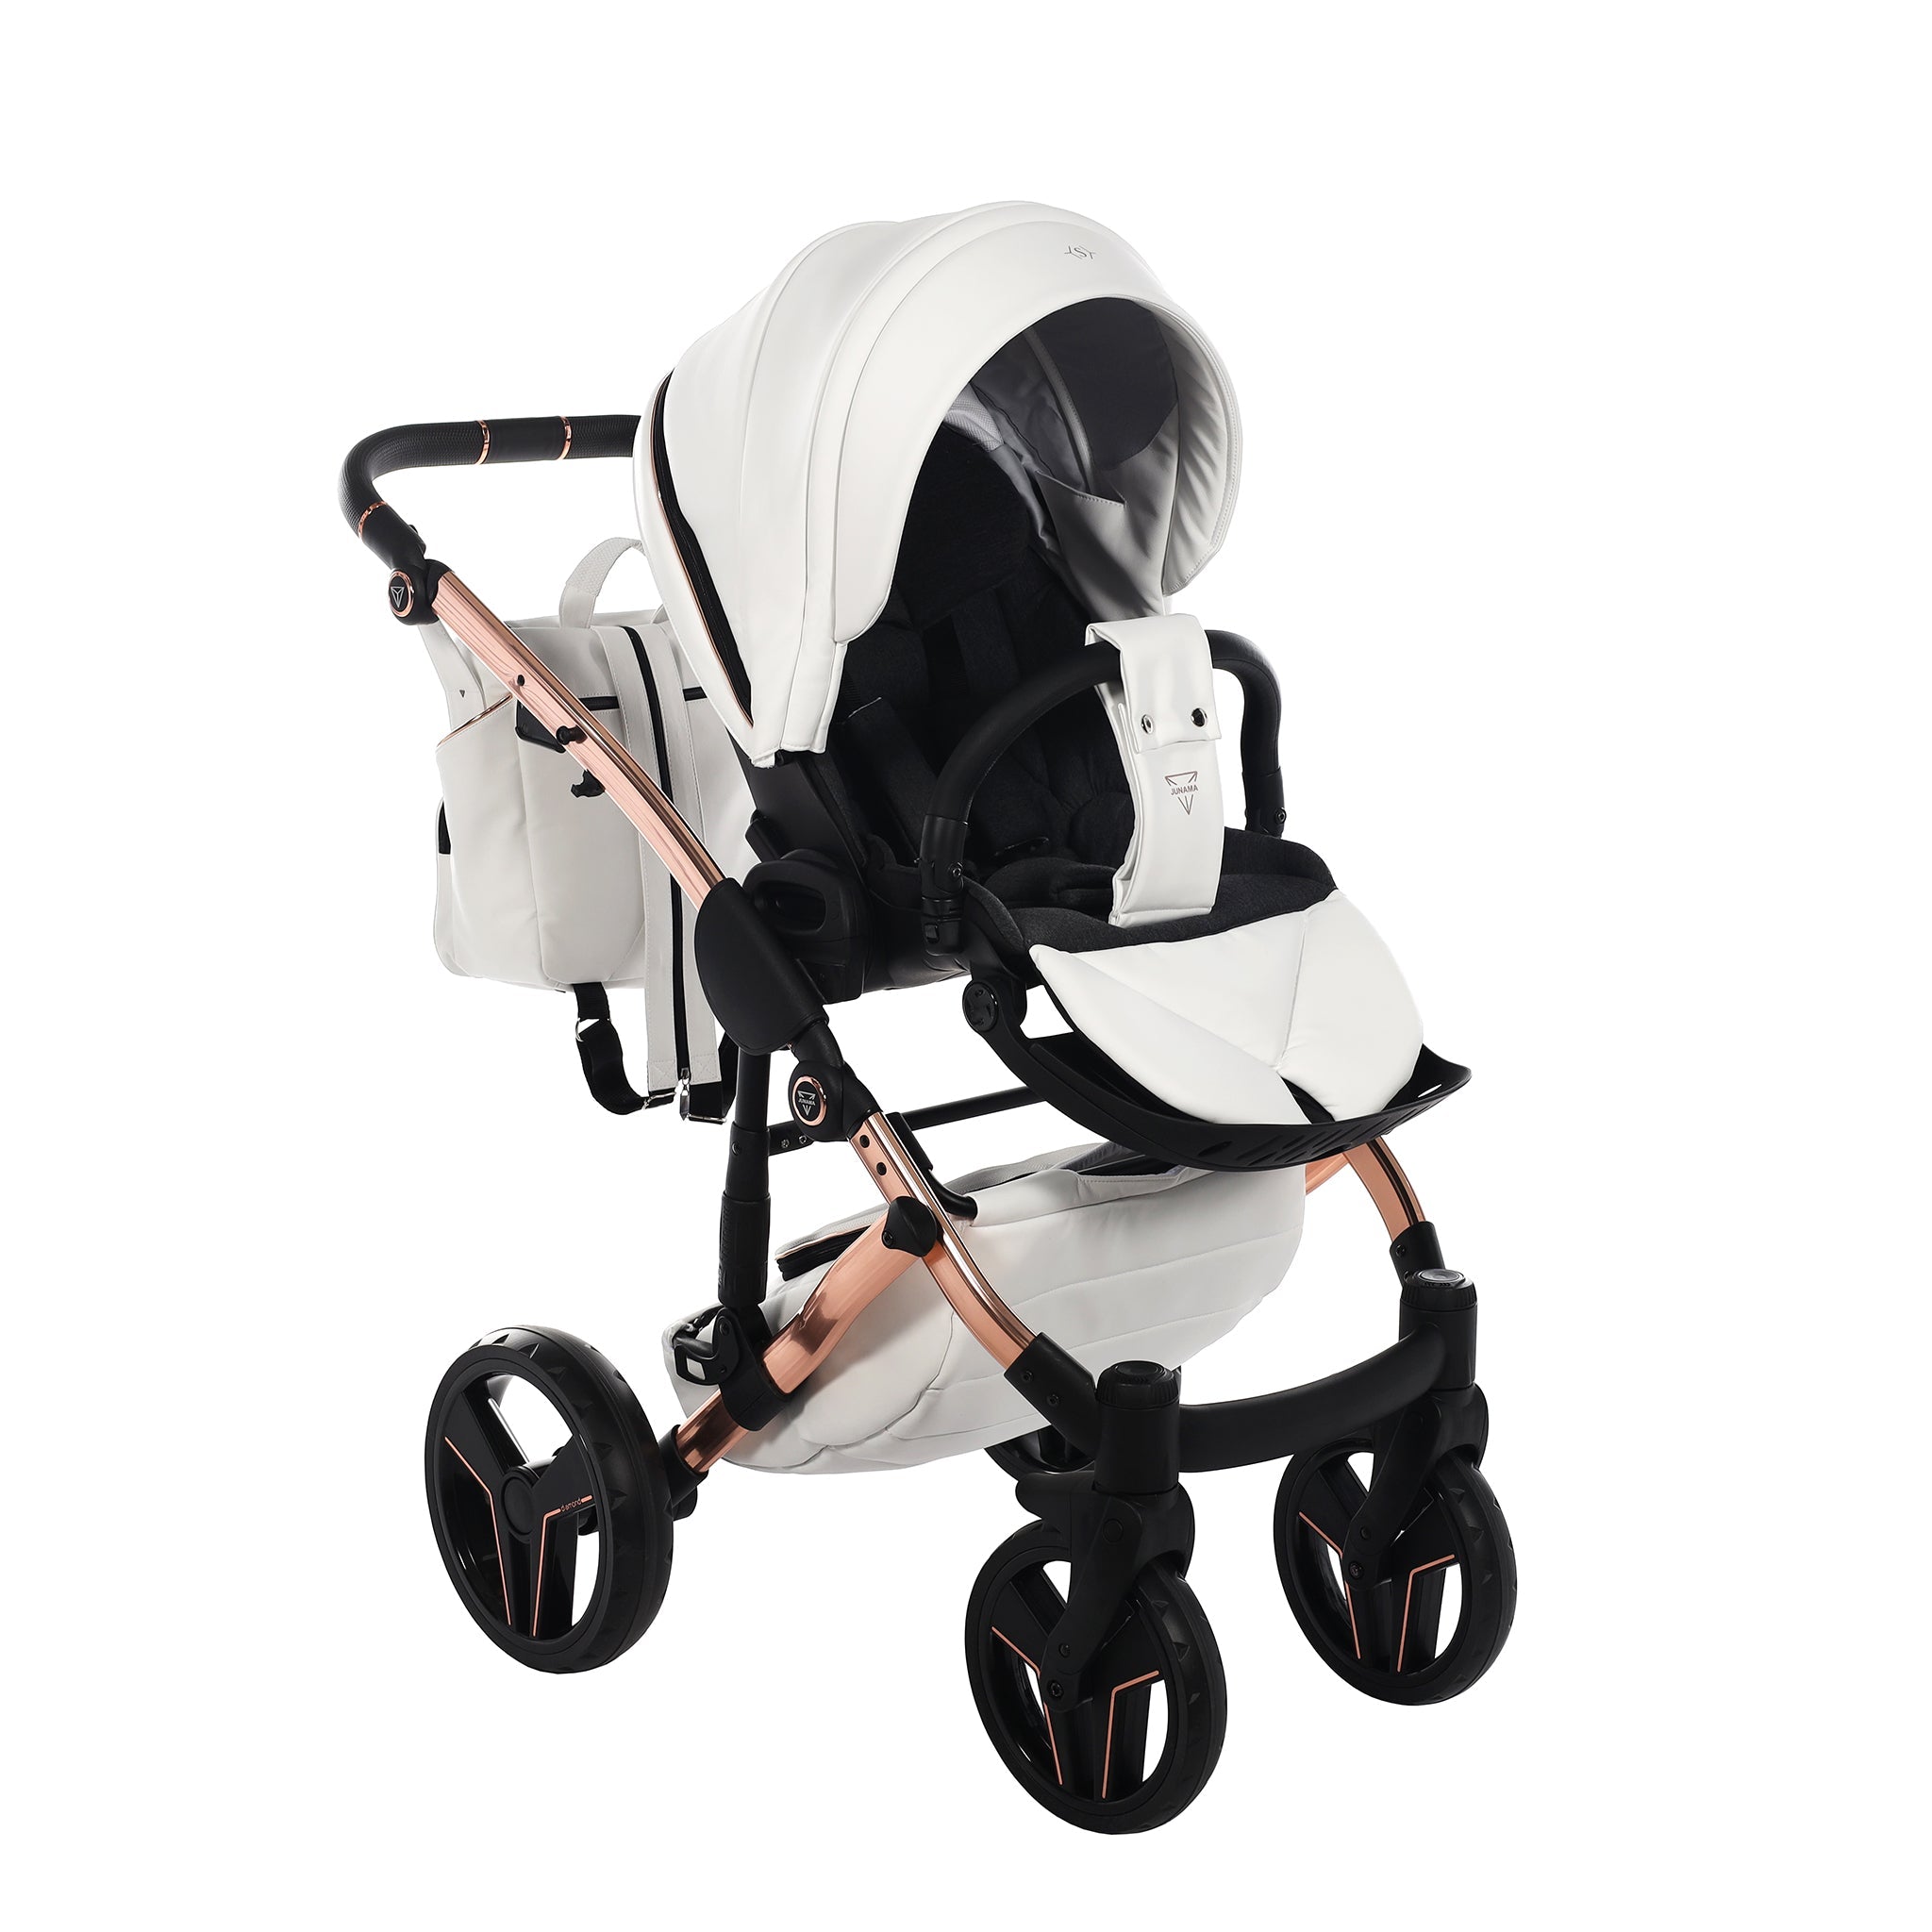 Junama S Class, baby prams or stroller 2 in 1 - Copper and white, Code number: JUNSC01